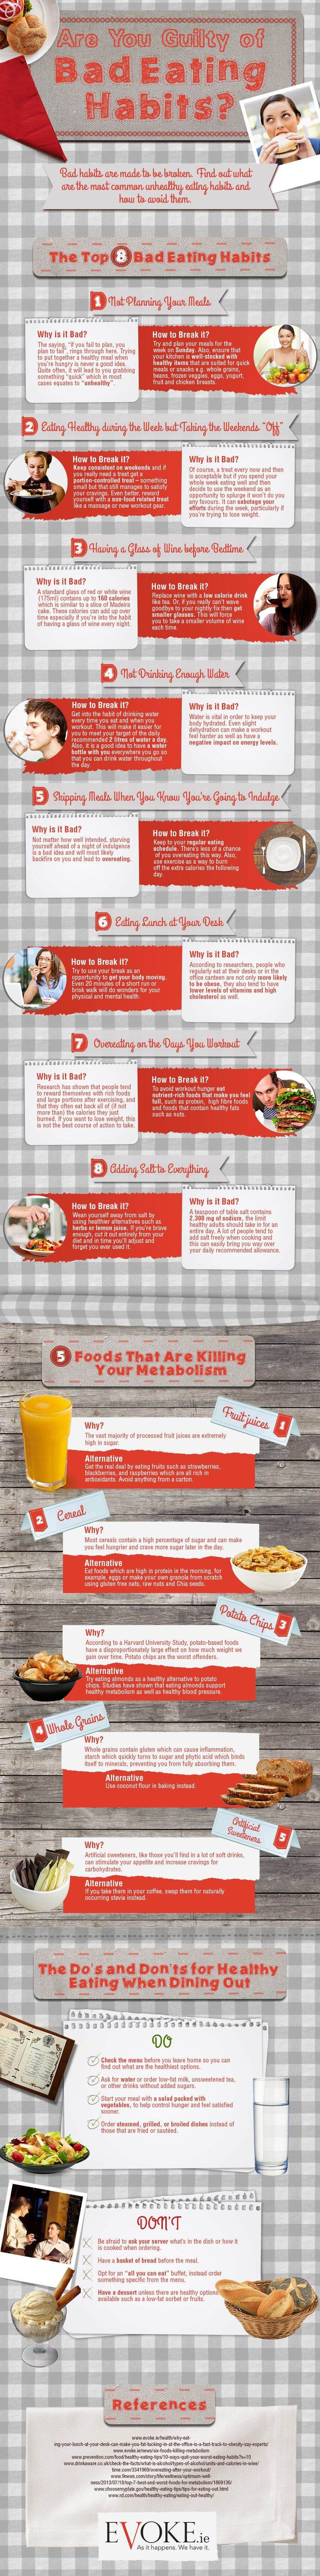 Bad eating habits infographic